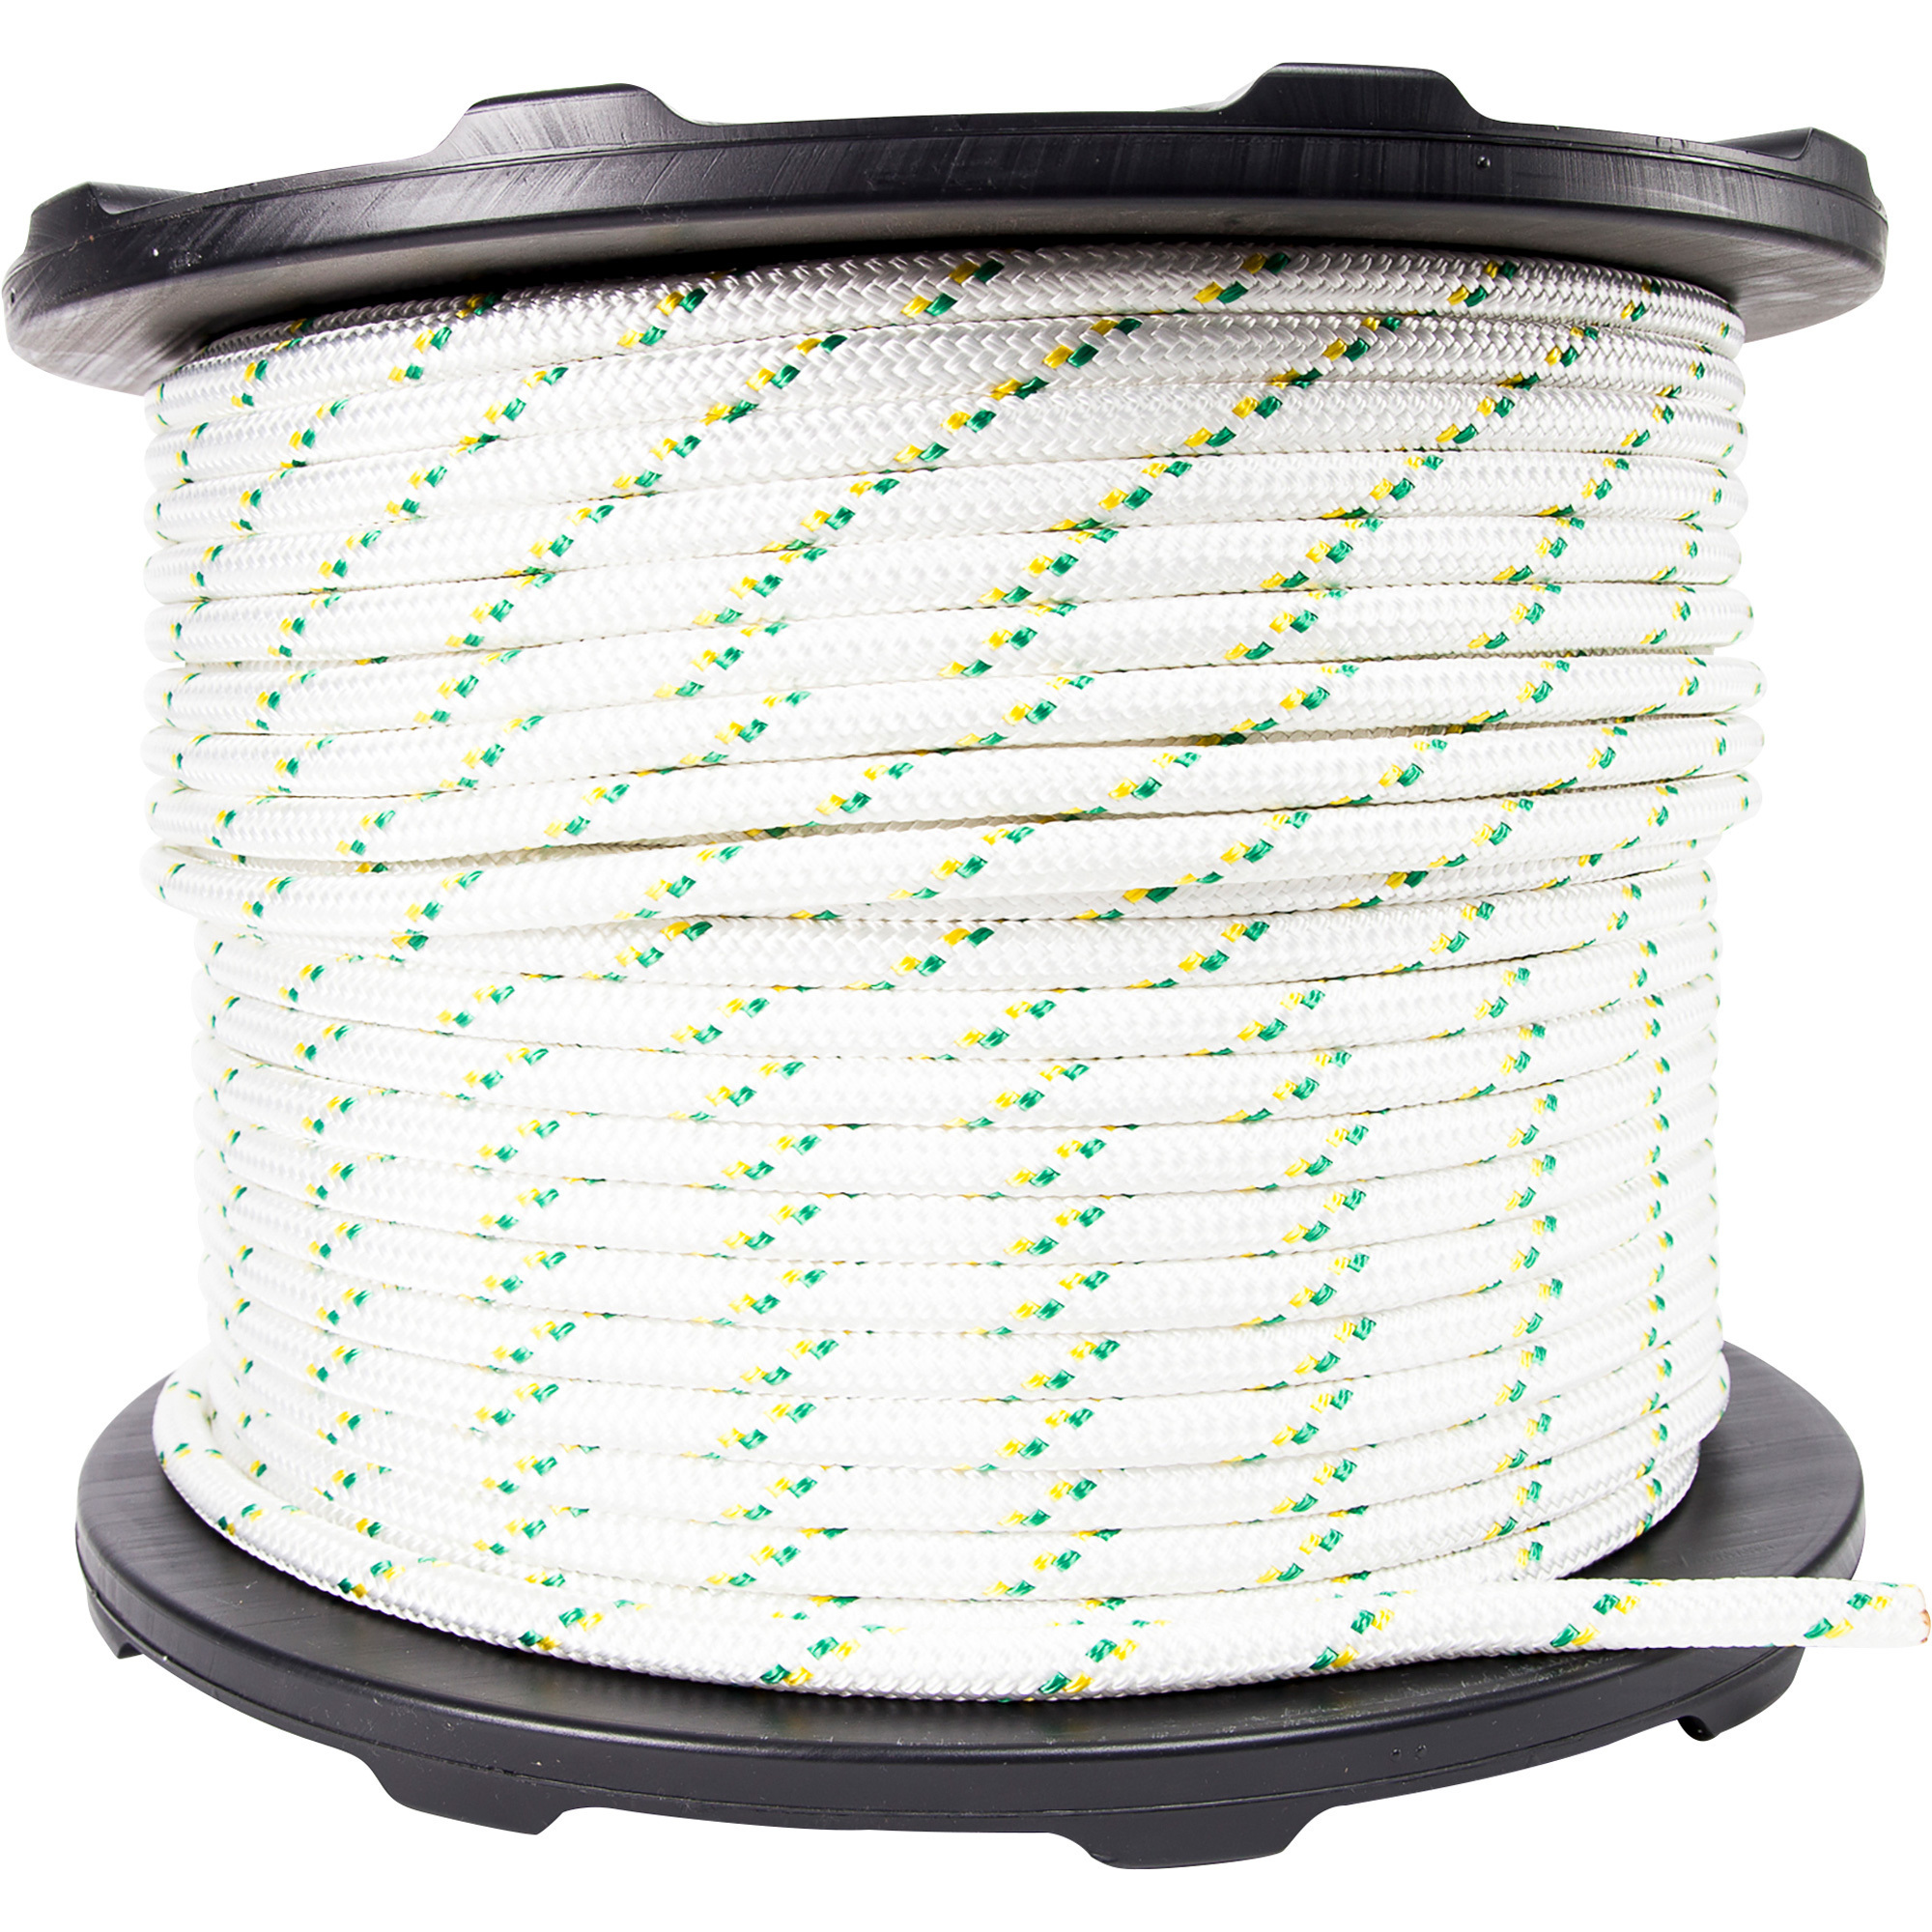 Portable Winch Rope â 656ft.L x 1/2Inch Diameter, 7275 Lbs. Breaking Strength, Model PCA-1216M